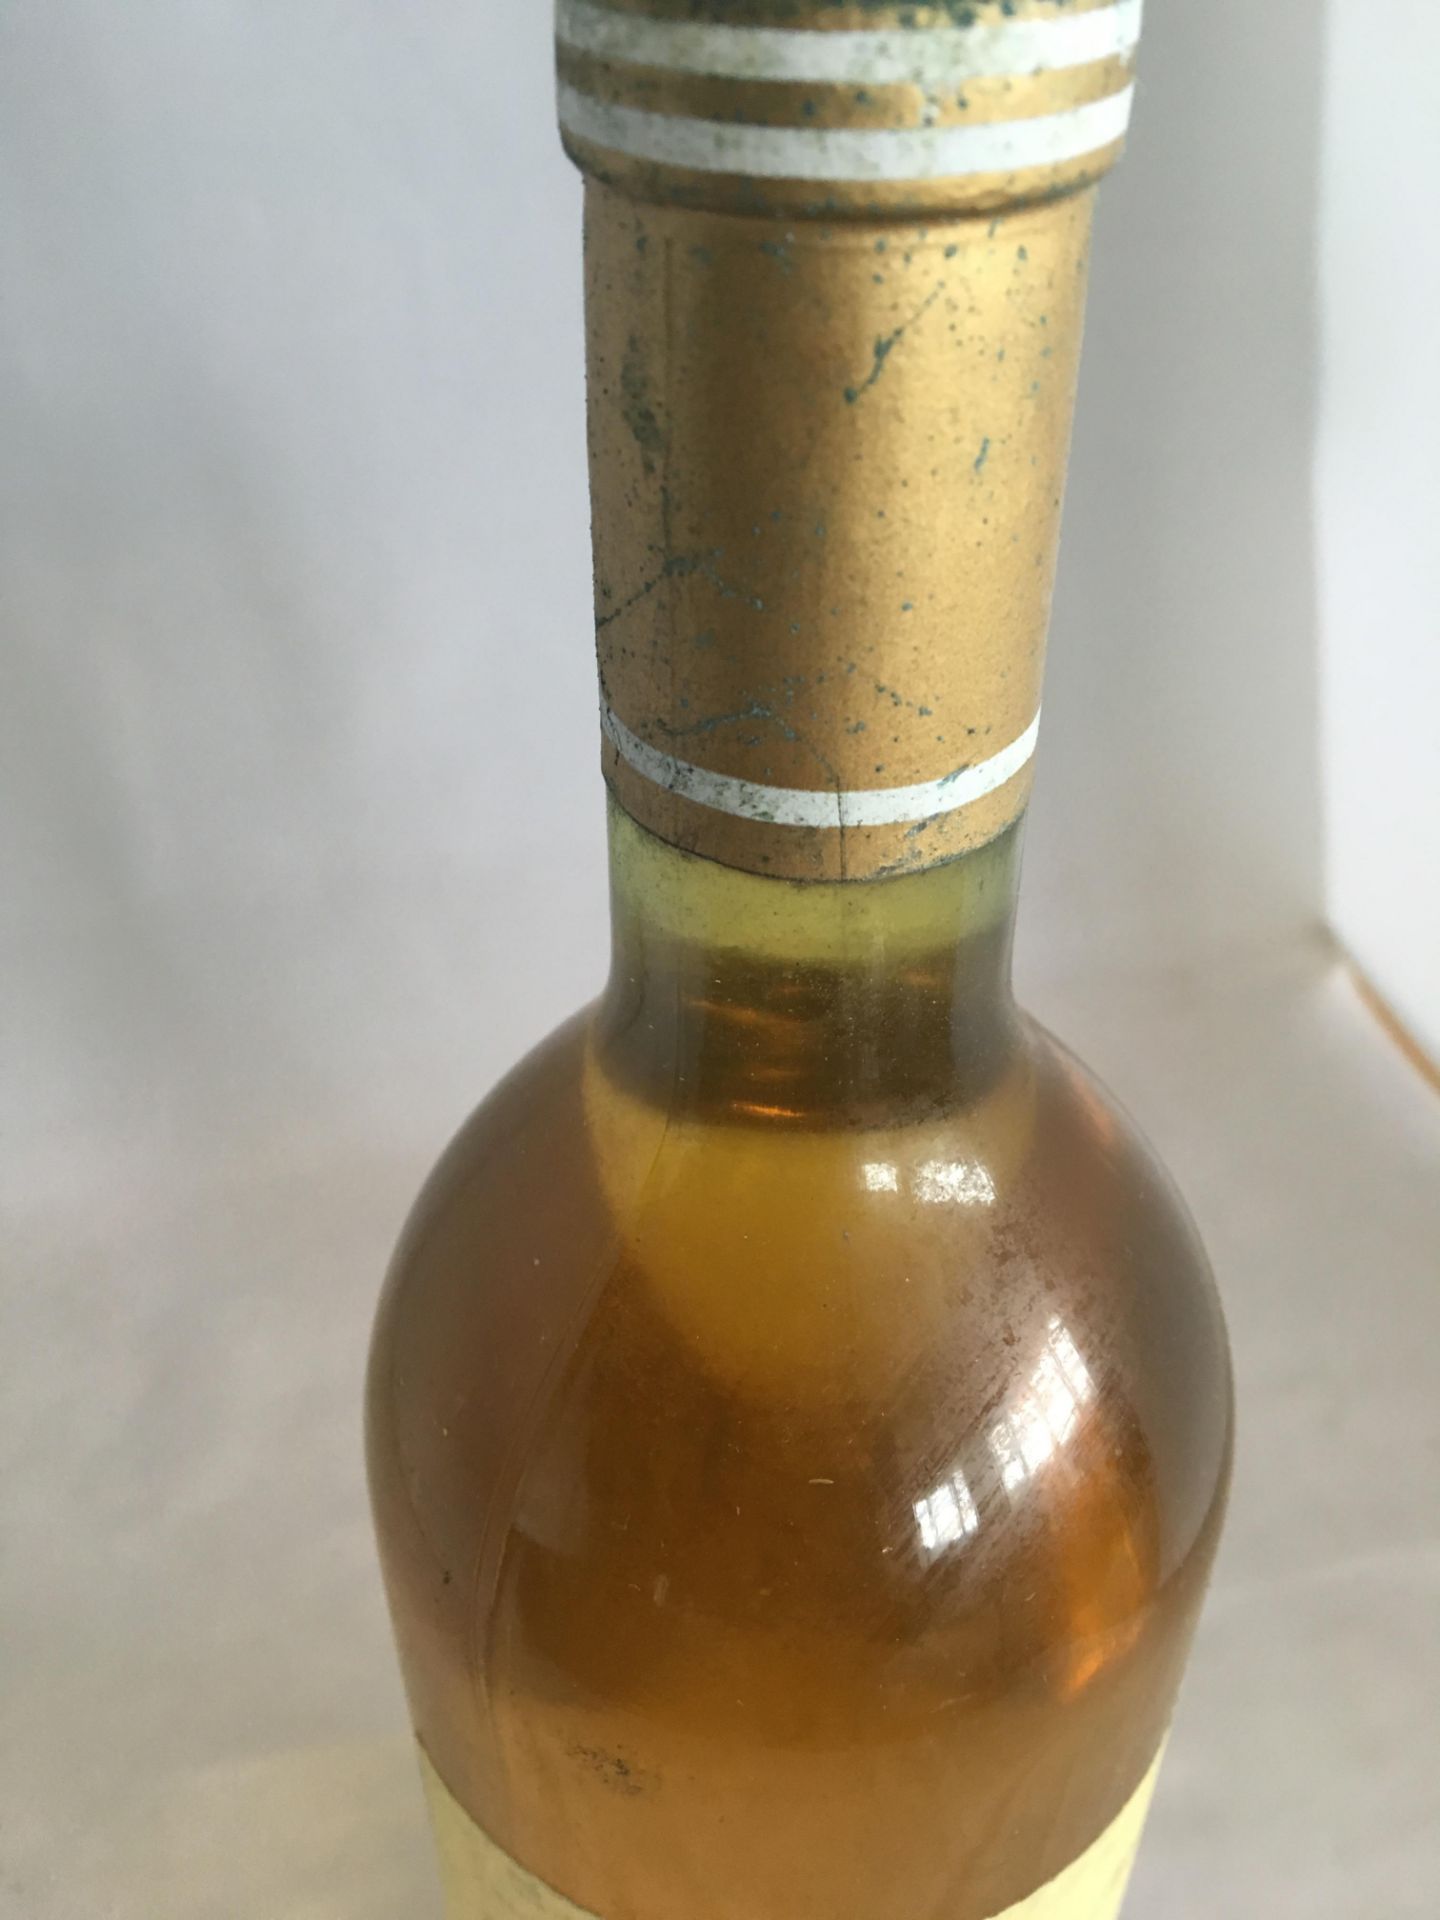 A BOTTLE OF WHITE WINE - 1972 GRAN RESERVA, COSECHA - Masia Bach - Extrismo Bach - WELL SEALED, - Image 3 of 3